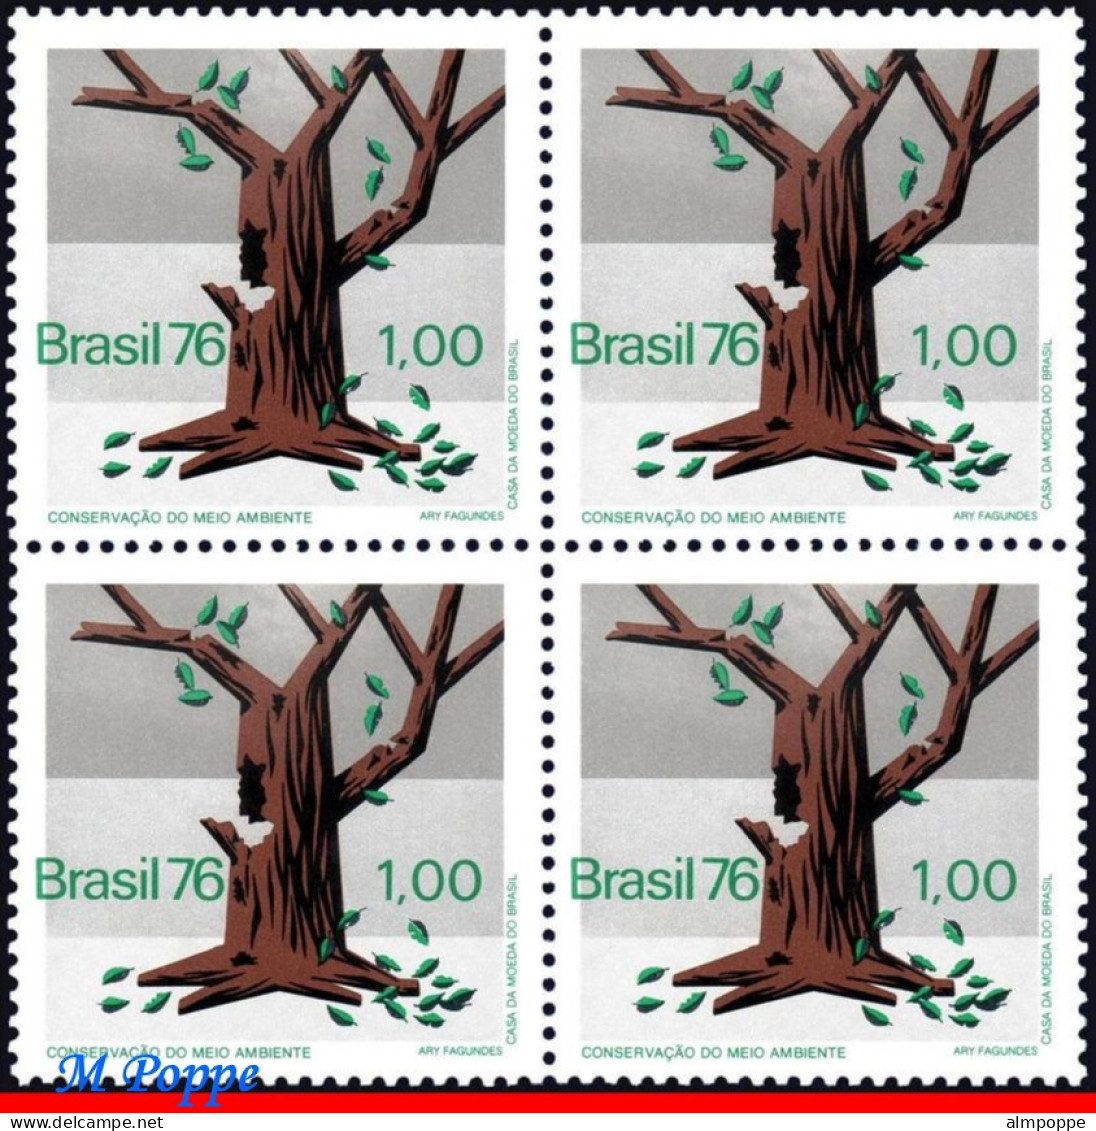 Ref. BR-1474-Q BRAZIL 1976 - PROTECTION OF ENVIRONMENT, DYING TREE, MI# 1559, BLOCK MNH, NATURE 4V Sc# 1474 - Blocs-feuillets